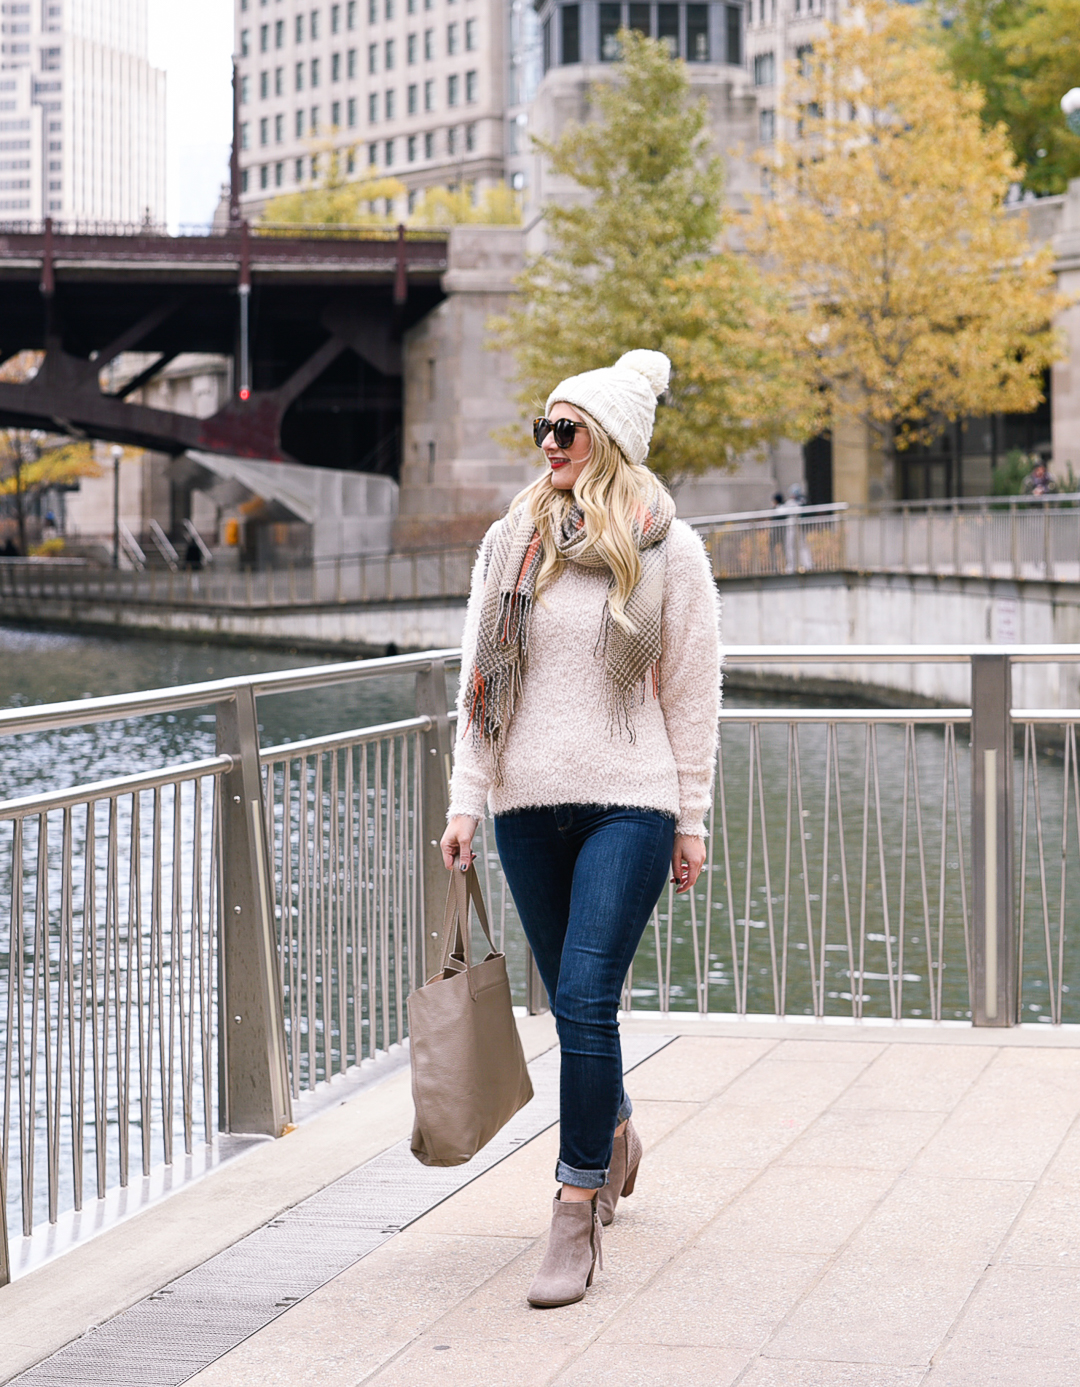 Neutral knits for a walk along the Chicago river! 